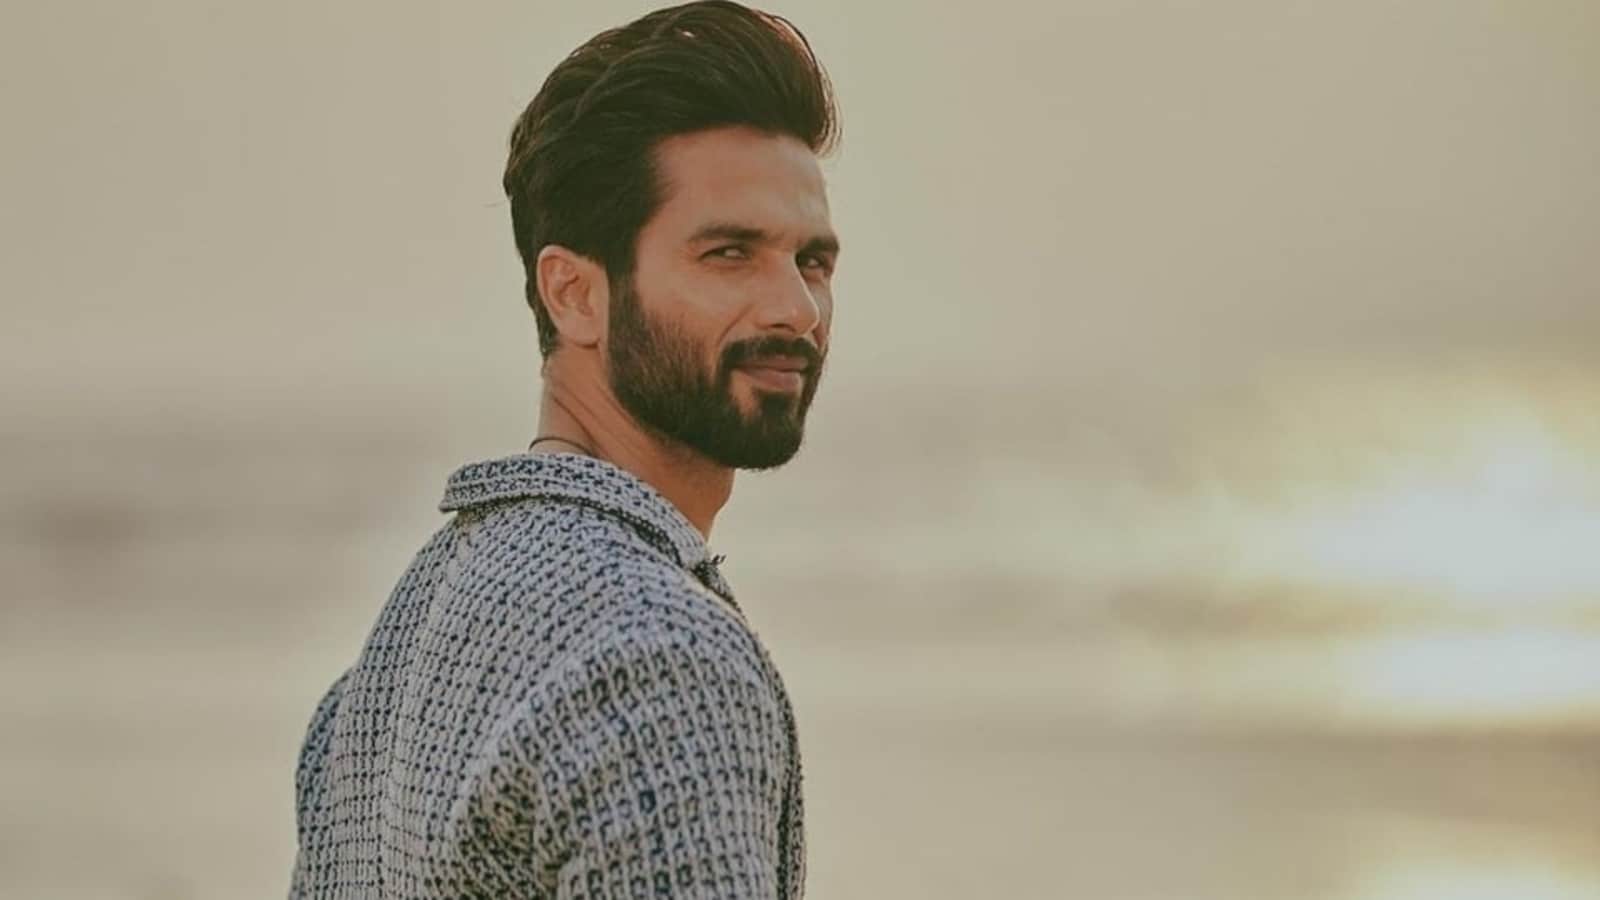 Shahid Kapoor’s beach photoshoot in ₹12k knit jacket and denim is all about having fun in style: See pics